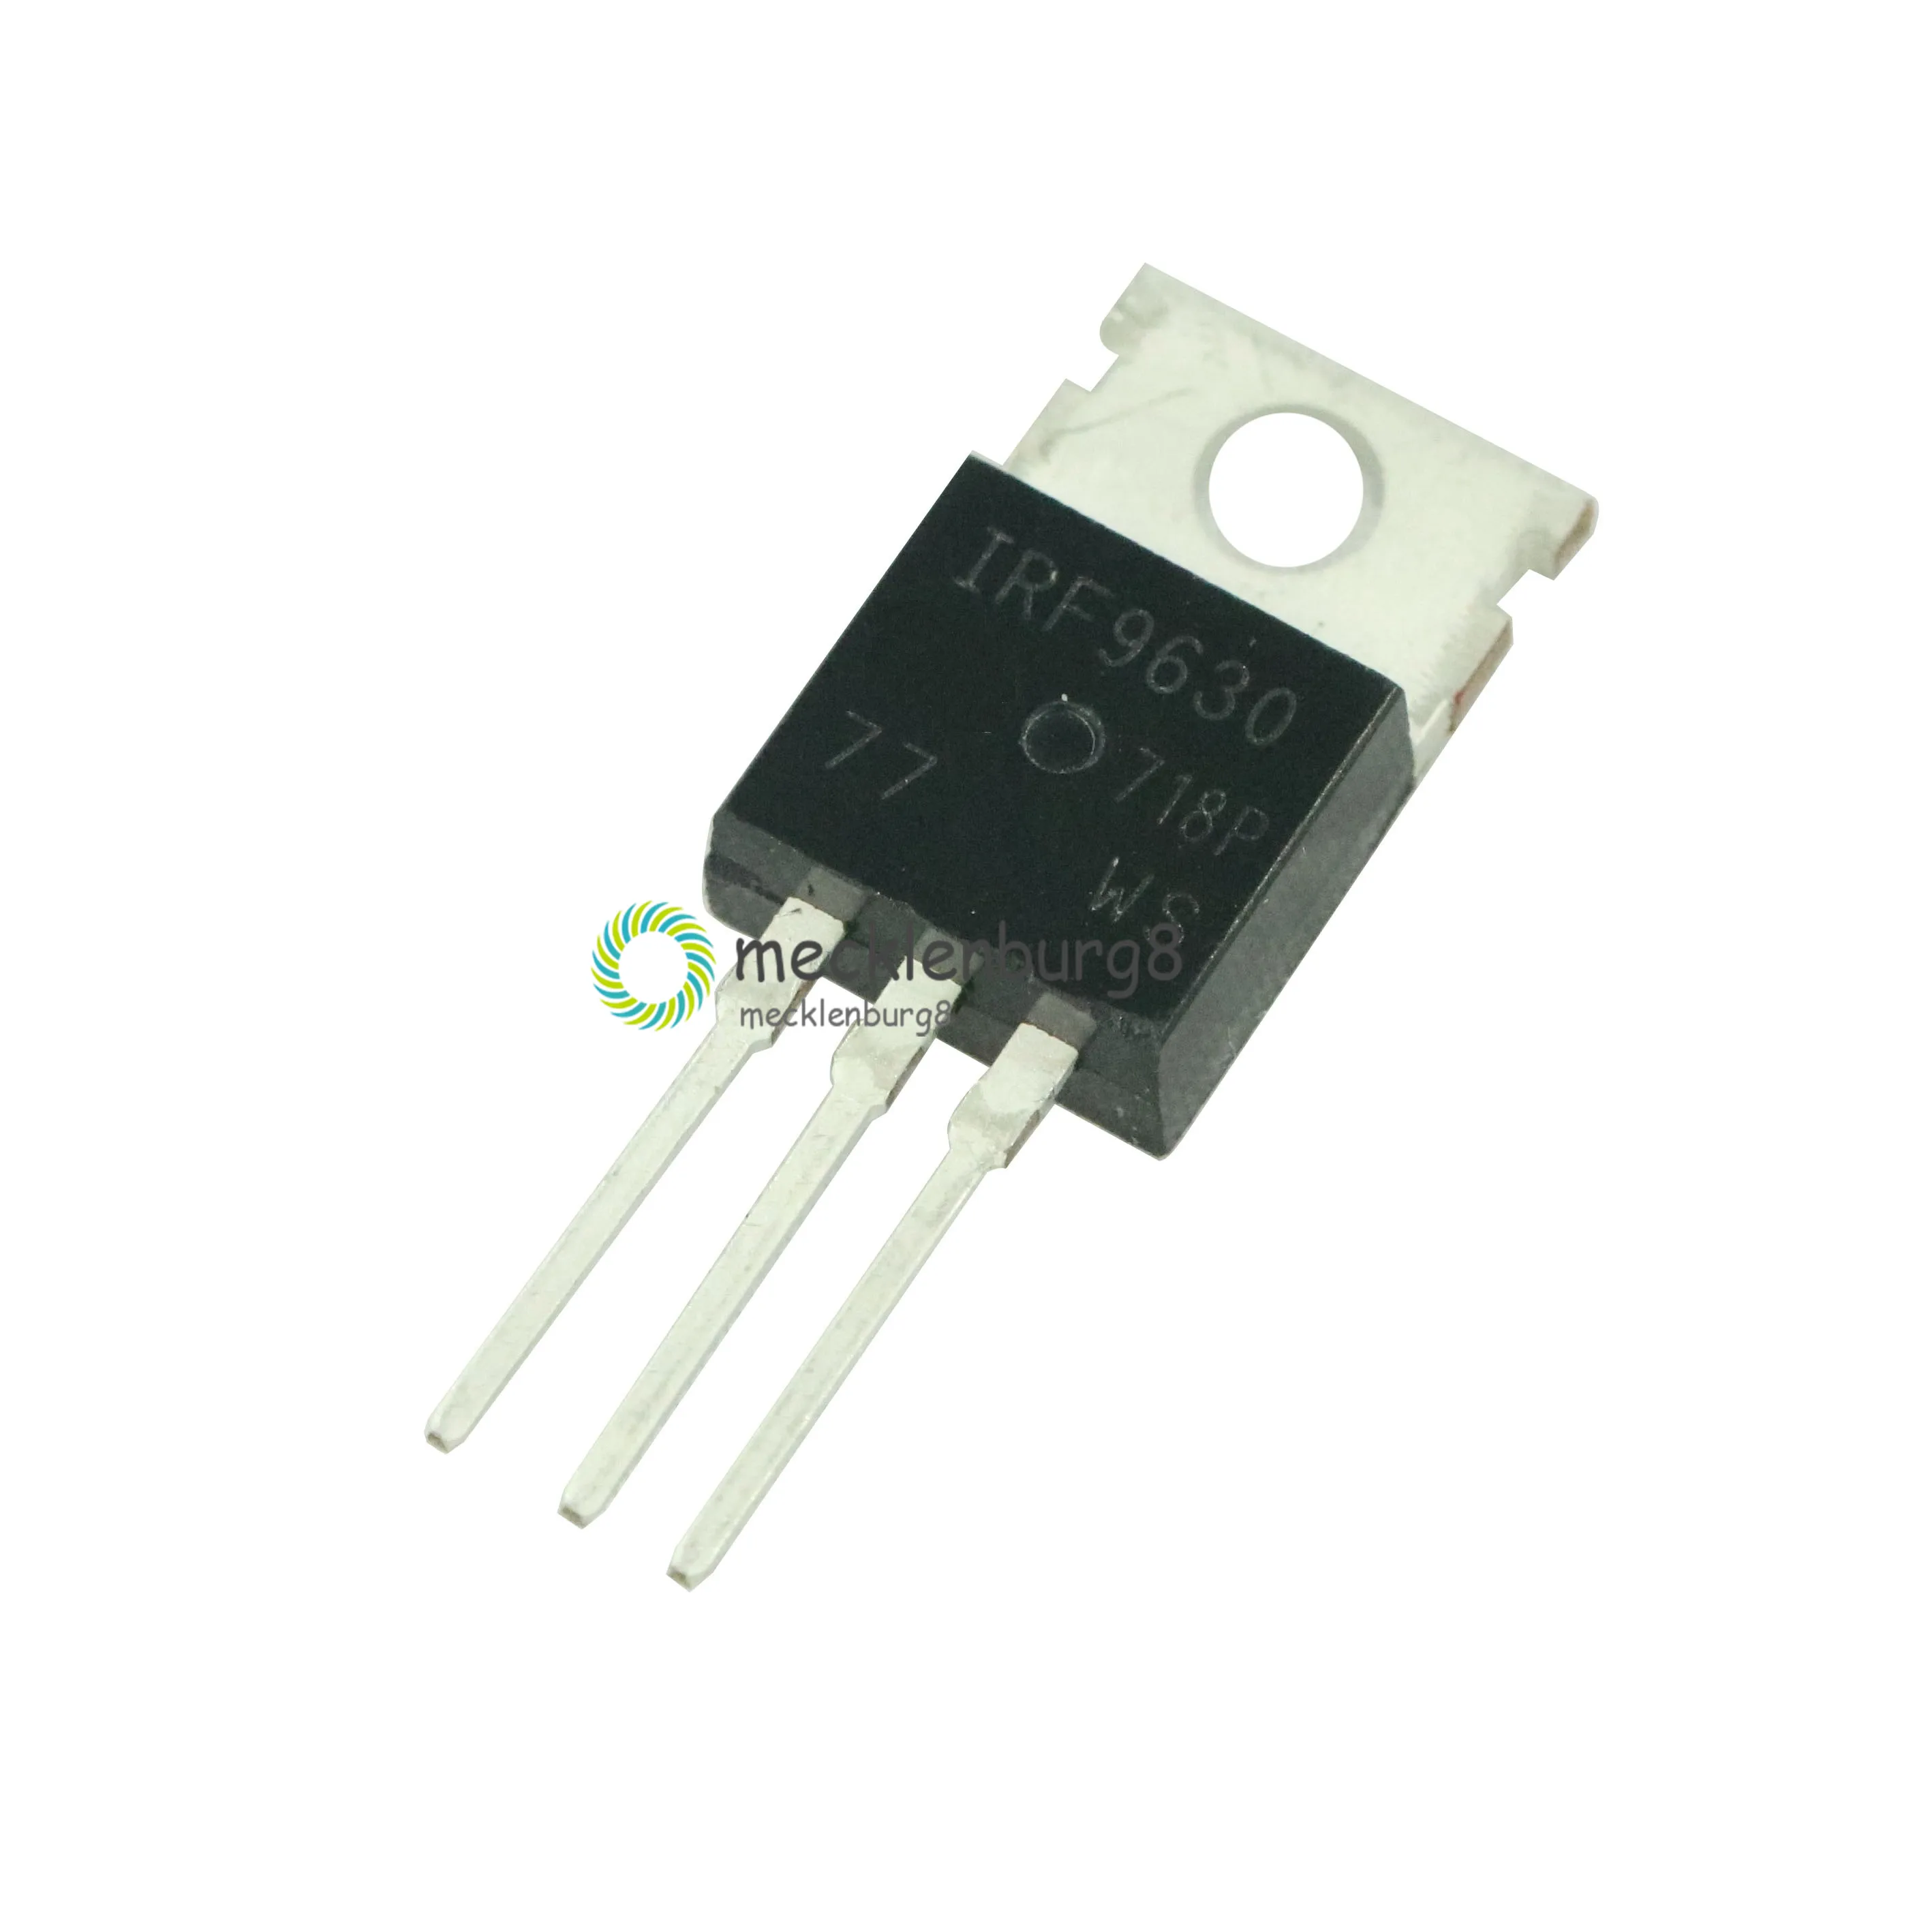 Harris Semiconductor NEU IRF9630 Transistor P-MOSFET 200V 6,5A 75W TO220 